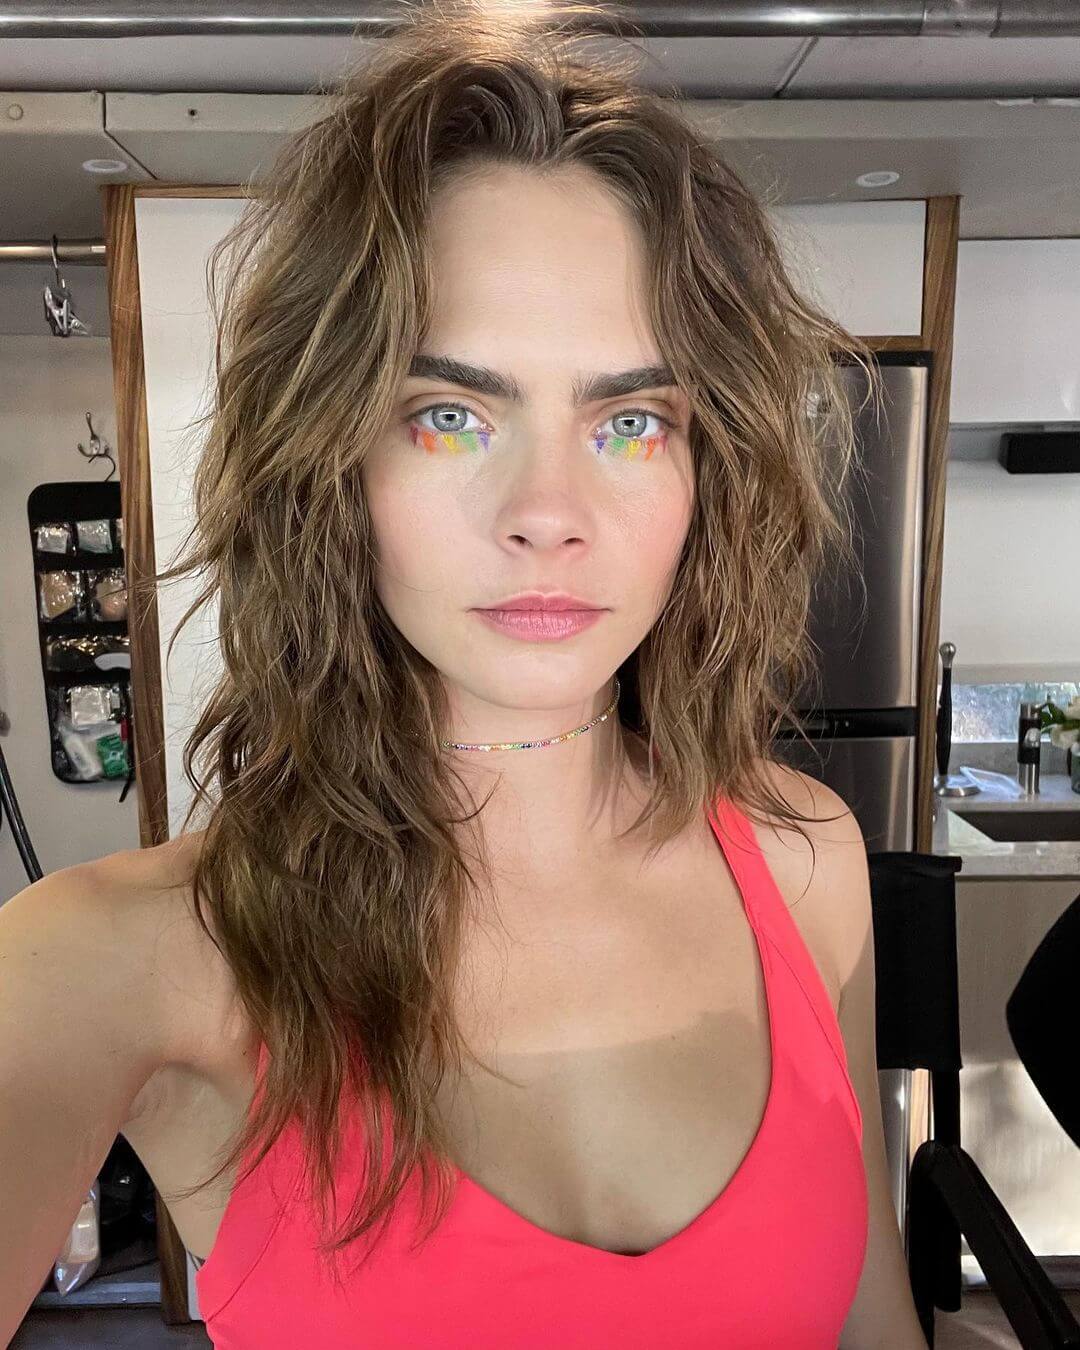 Cara Delevingne Rocks the 70s Shag Look with Colorful Eye Makeup and a Coral Pink Top